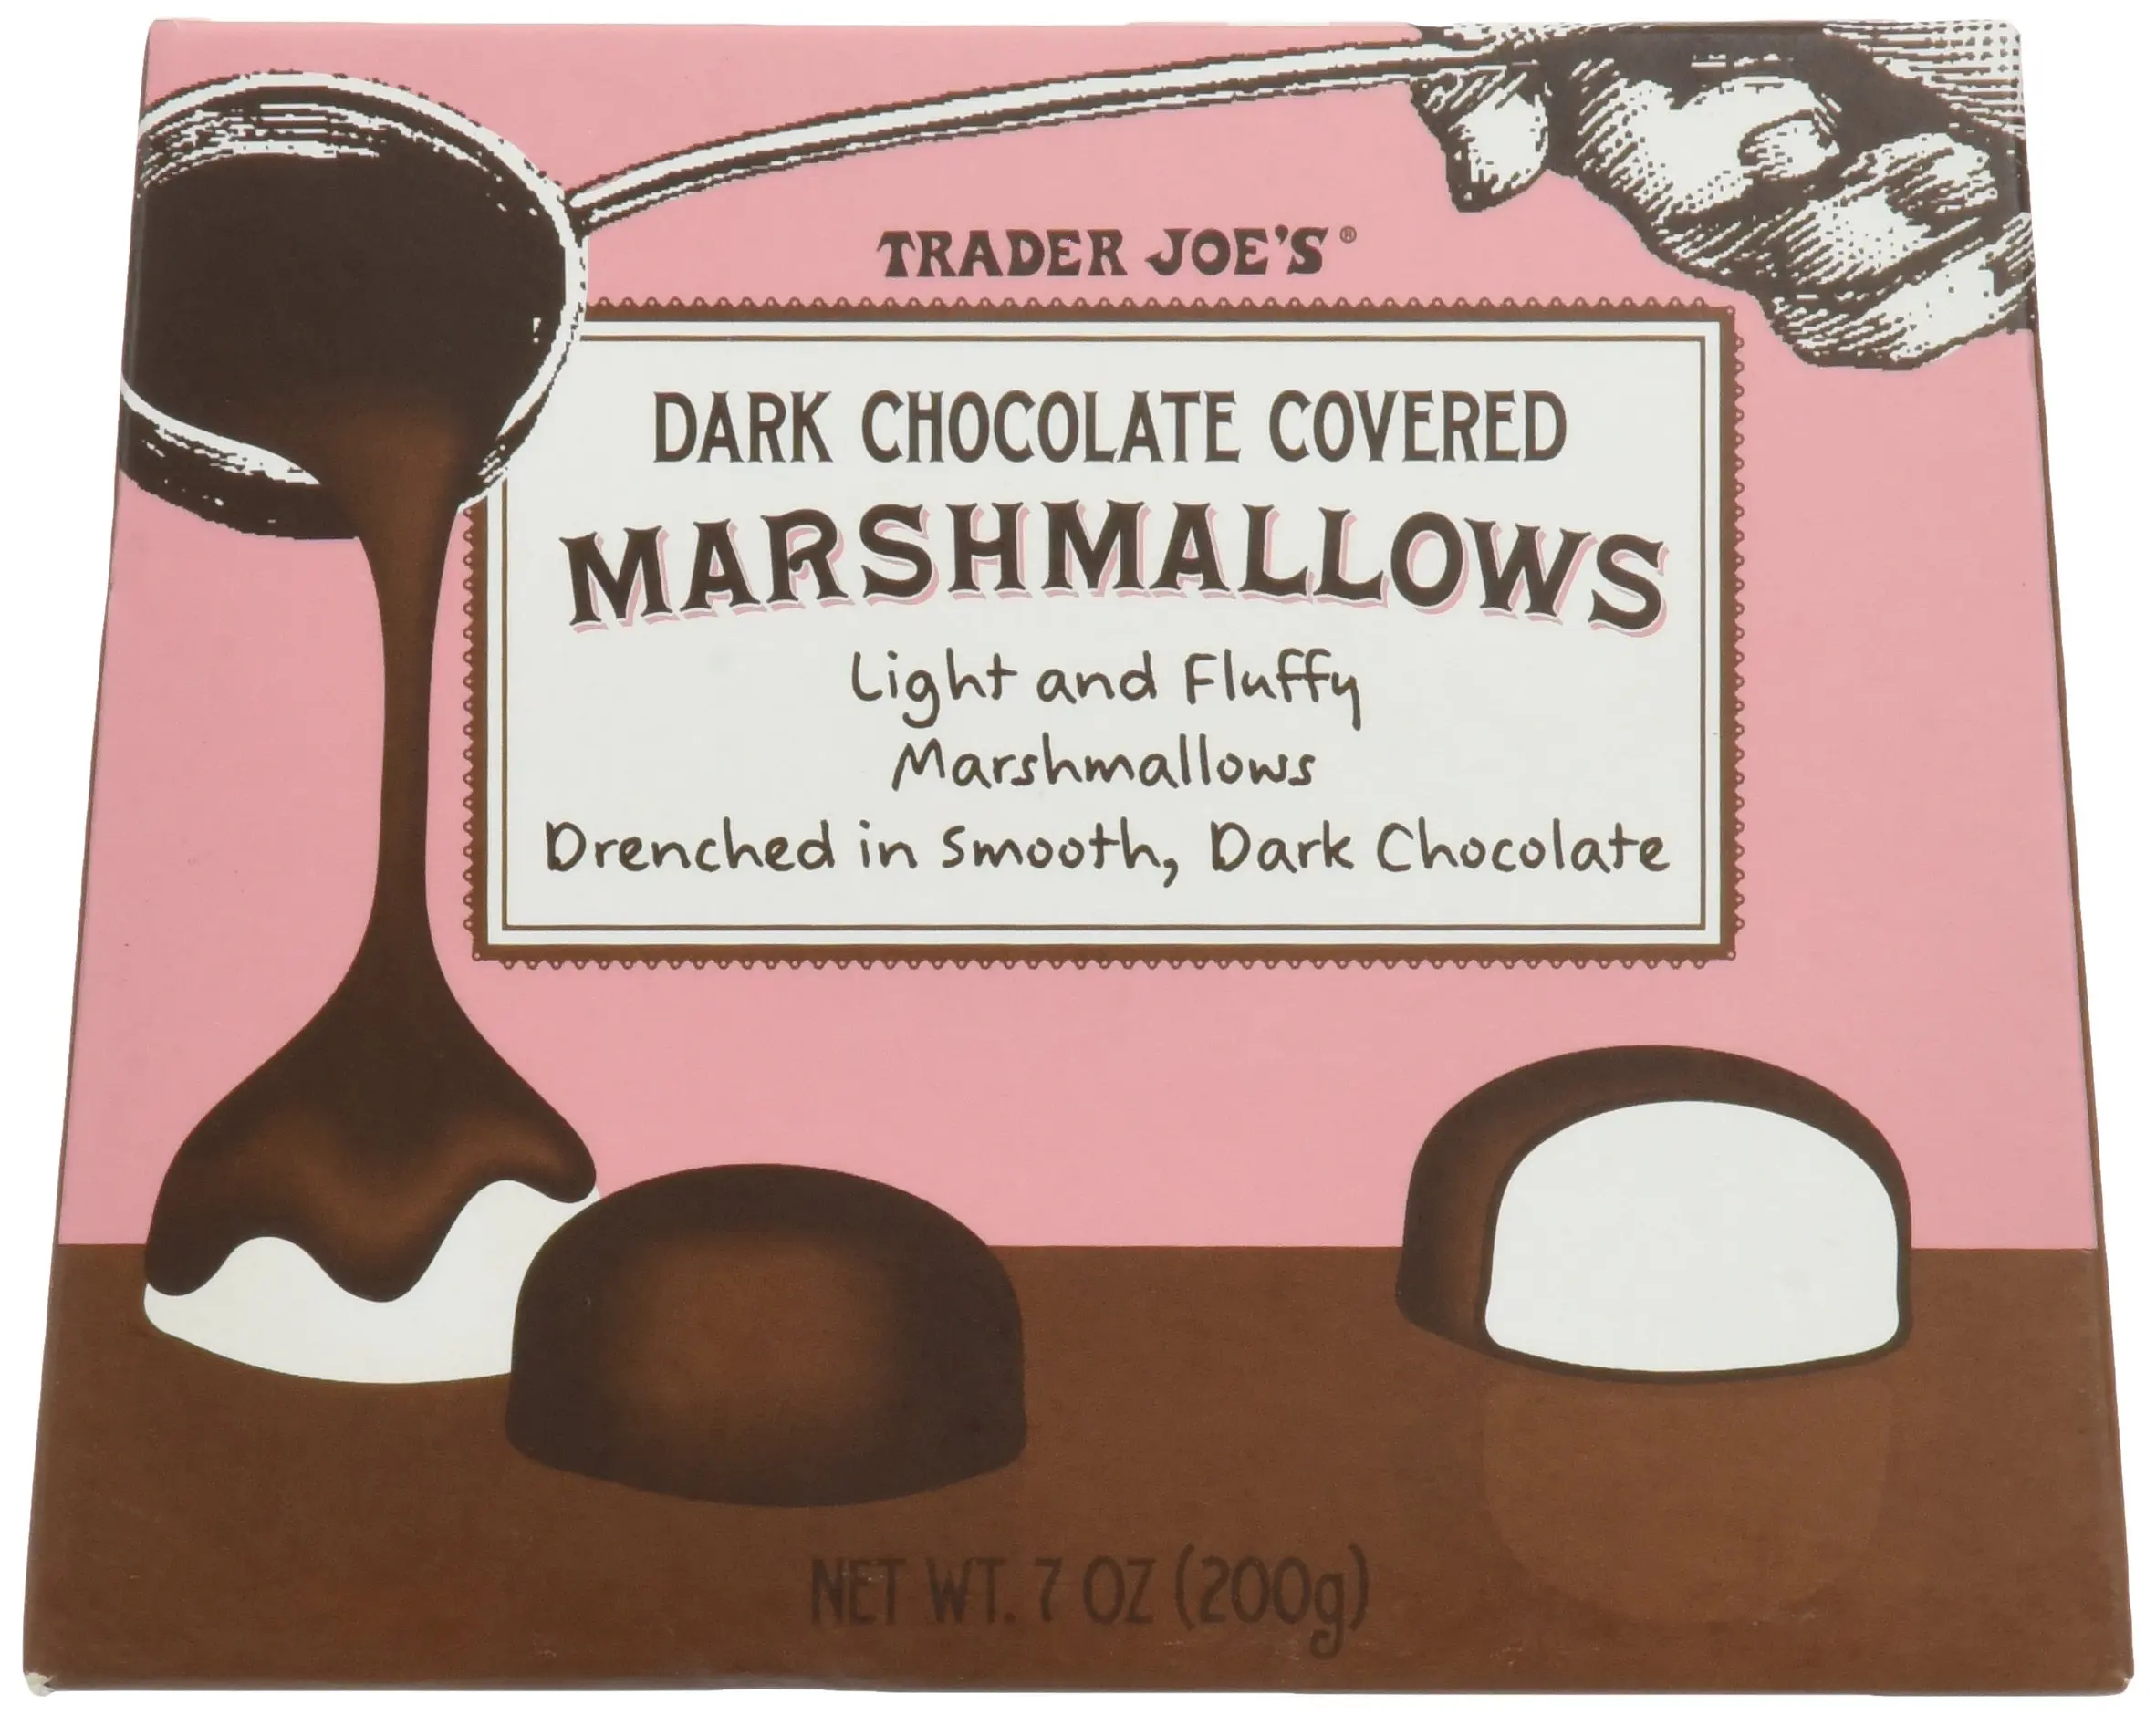 Trader Joes Dark Chocolate Covered Marshmallows - 2 Pack. 